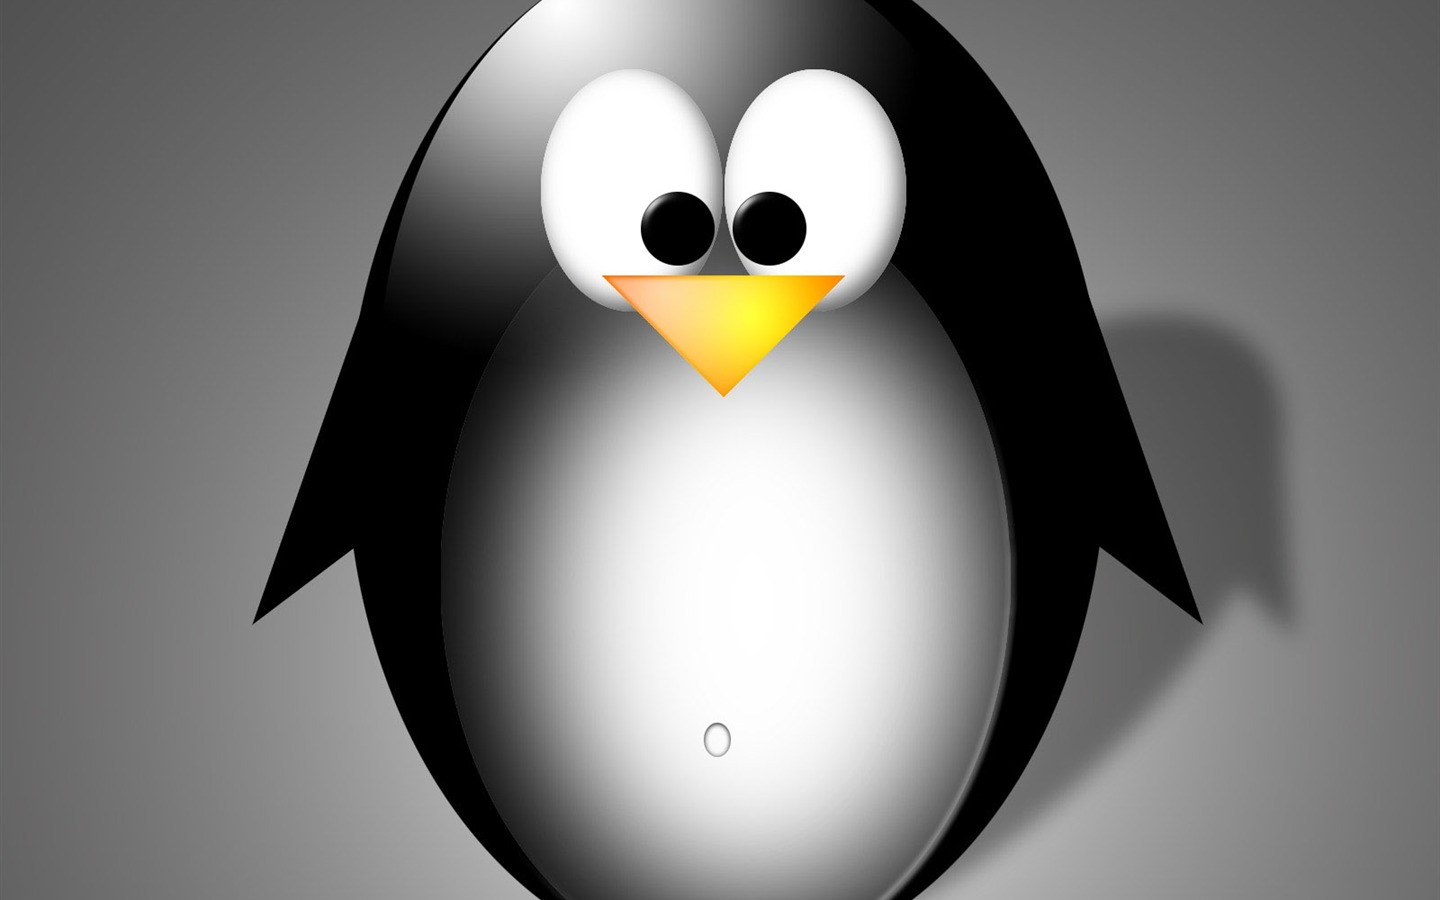 Linux tapety (1) #3 - 1440x900